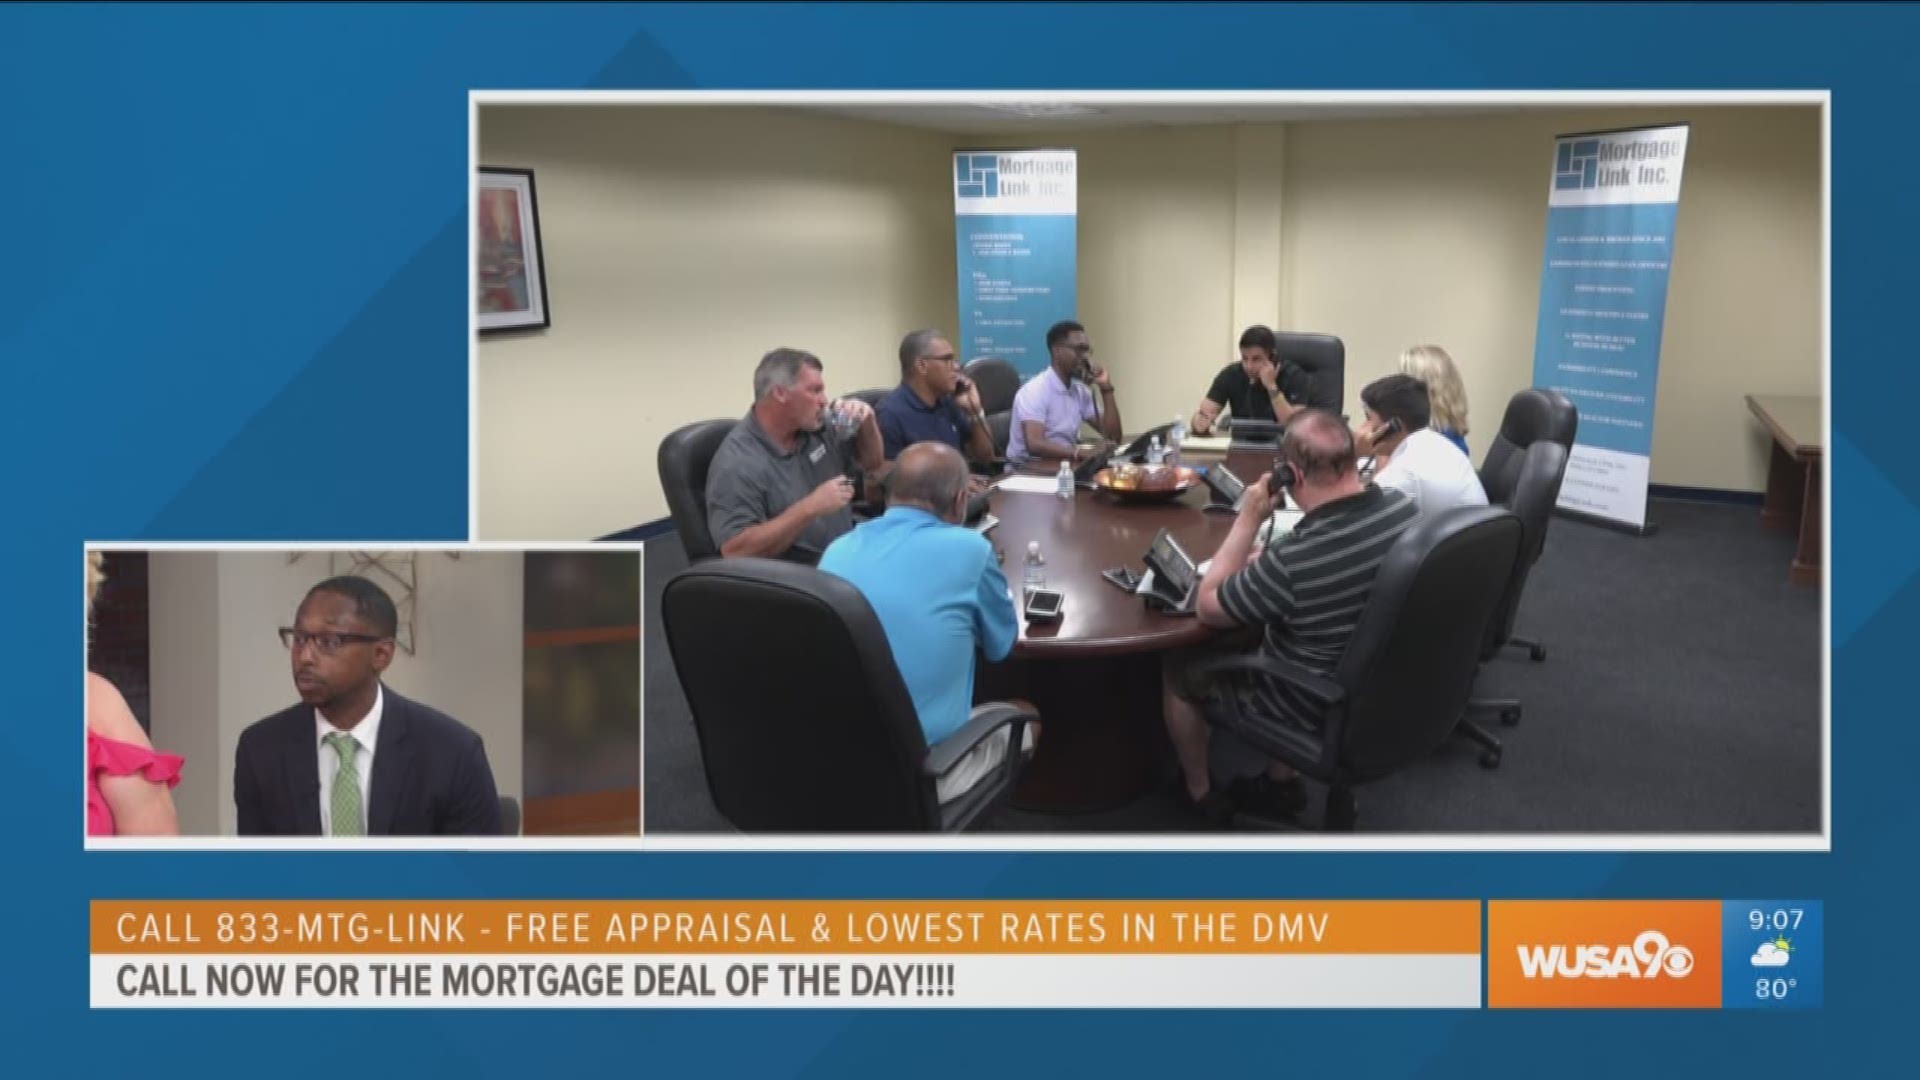 The Real Estate Top Performers are back with tips to successfully stage a home for a quick and easy sell thanks to realtor Nicole Canole of East + Ivy Homes.  Take advantage of the 'Mortgage Deal of the Day' by calling (833) MTG-LINK.  Senior loan officers are waiting to take your call right now!  Follow the Real Estate Top Performers on YouTube.